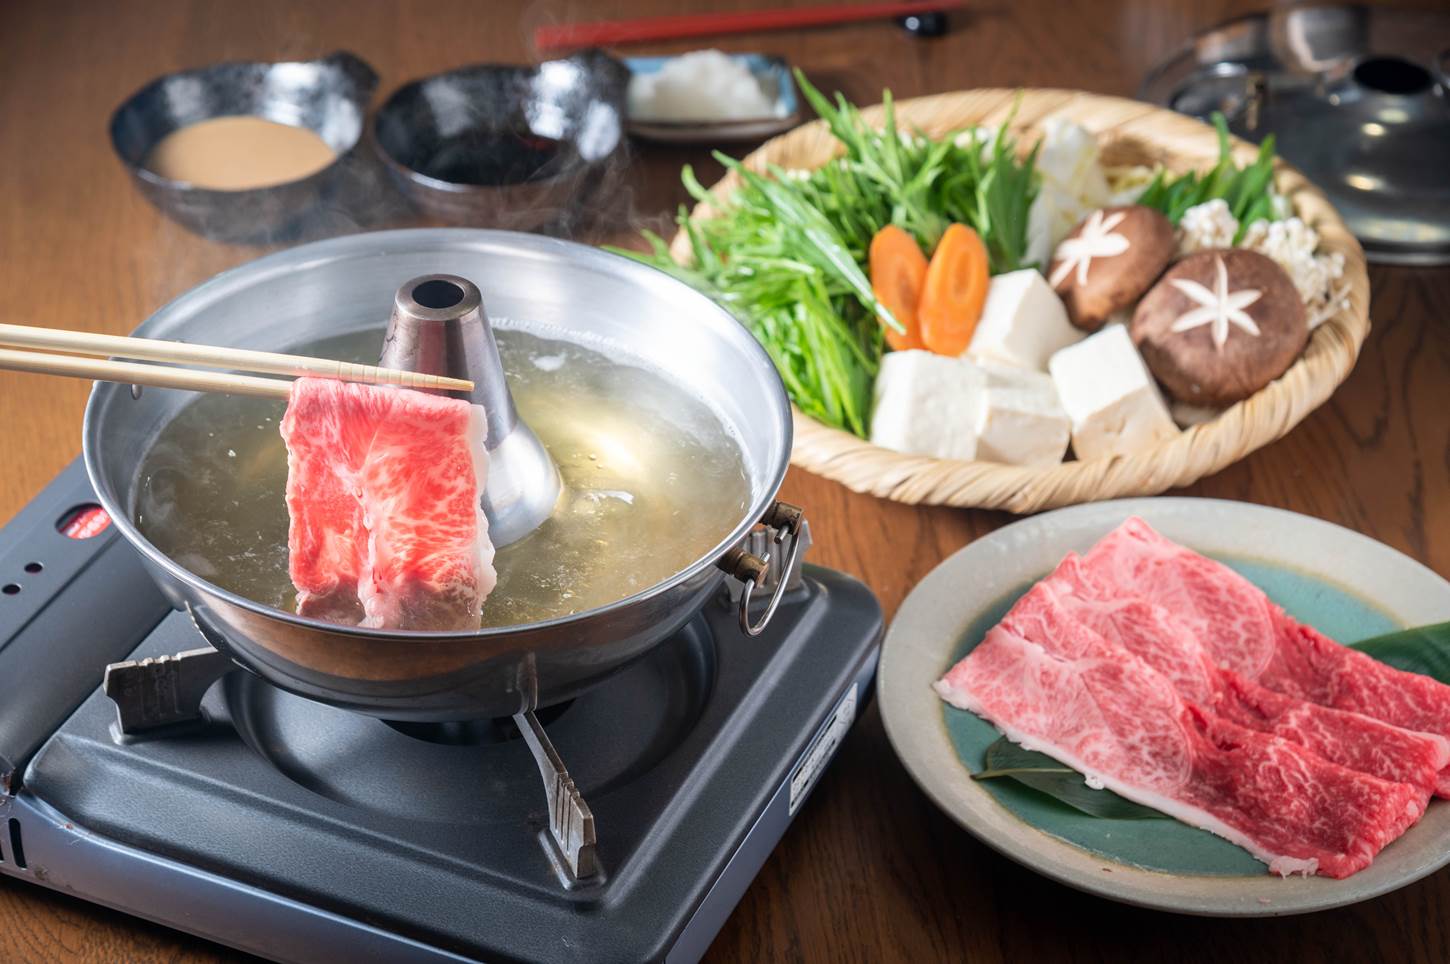 In shabu-shabu cooking, we put thinly sliced beef into boiling water instantaneously before eating it = Shutterstock